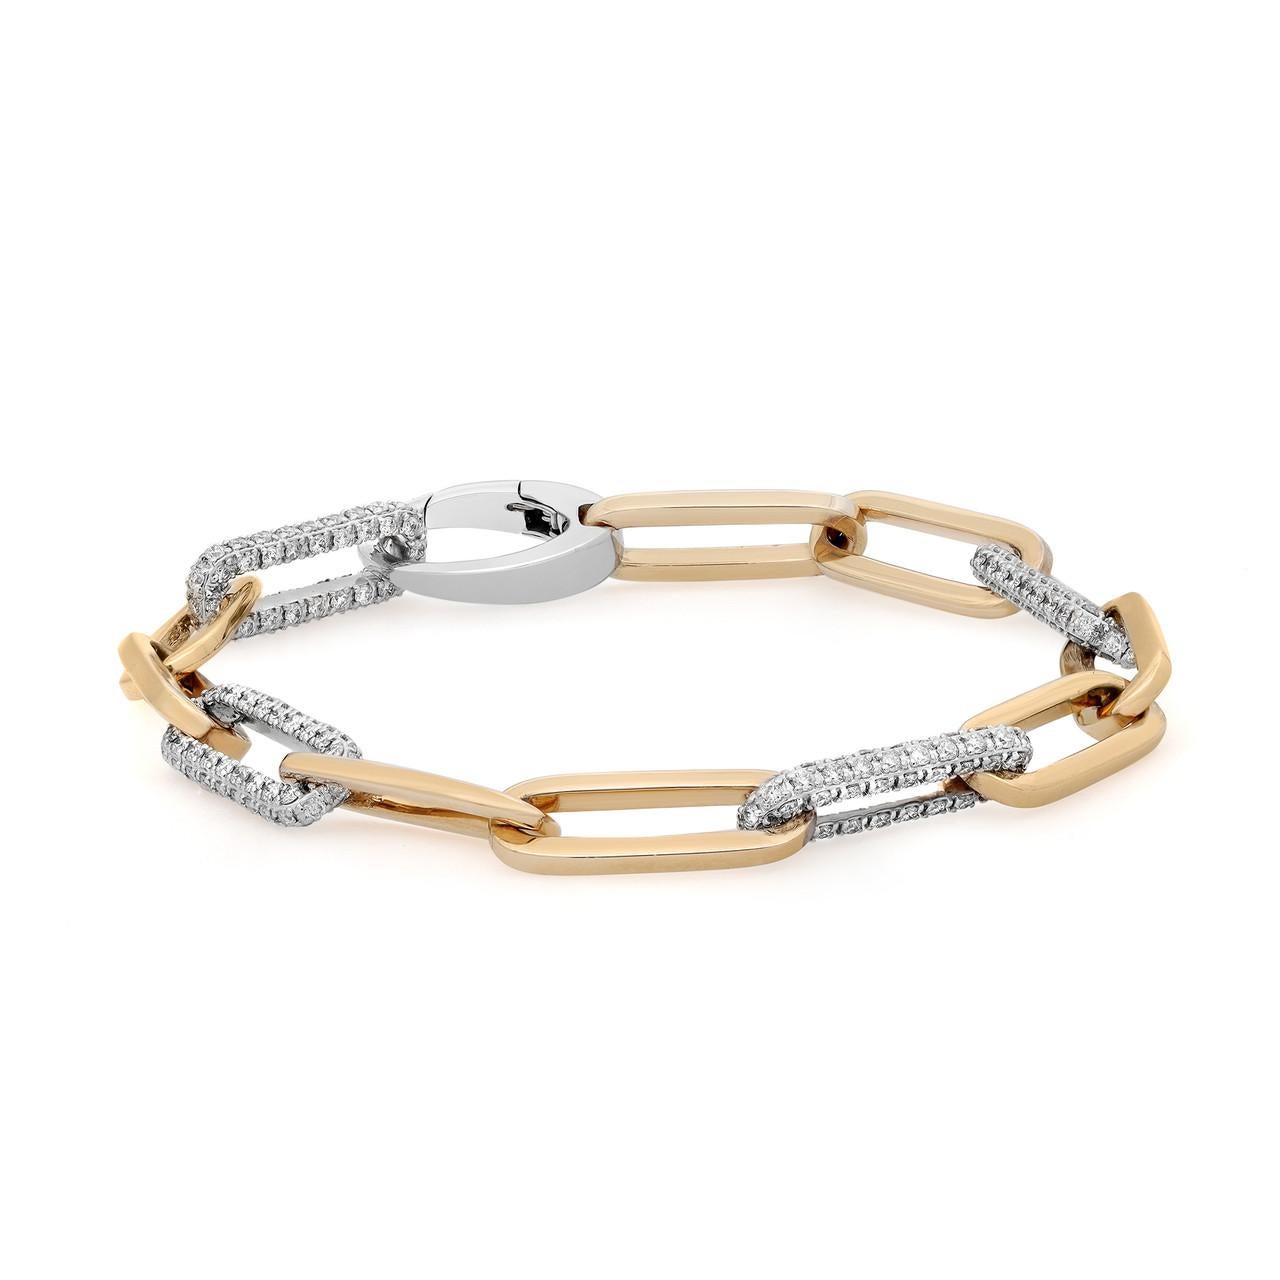 Introducing the sleek and modern paperclip-link bracelet, a sophisticated piece crafted from 14K white and yellow gold. This exquisite bracelet is adorned with shimmering pavé white diamonds, totaling 2.04 carats. The combination of the two-tone